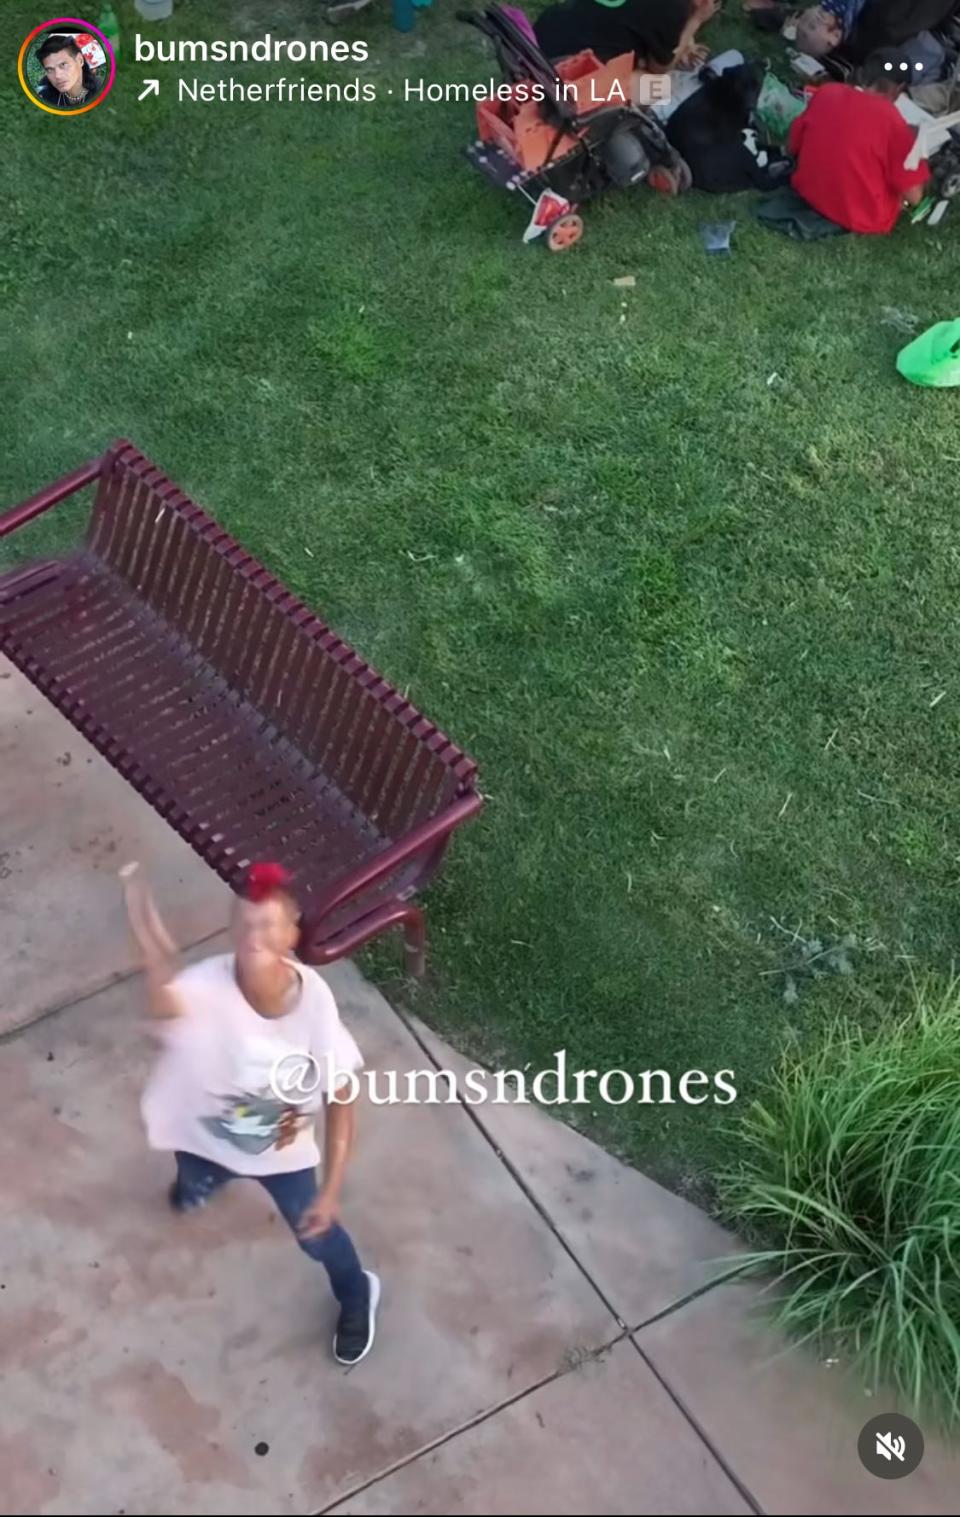 A person throws an object at a drone filming them in an area of Pueblo in this video posted to the 'bumsndrones' Instagram account run by Pueblo developer Henry 'Hank' Borunda. On the page, Borunda posts drone videos that mock people who are homeless.